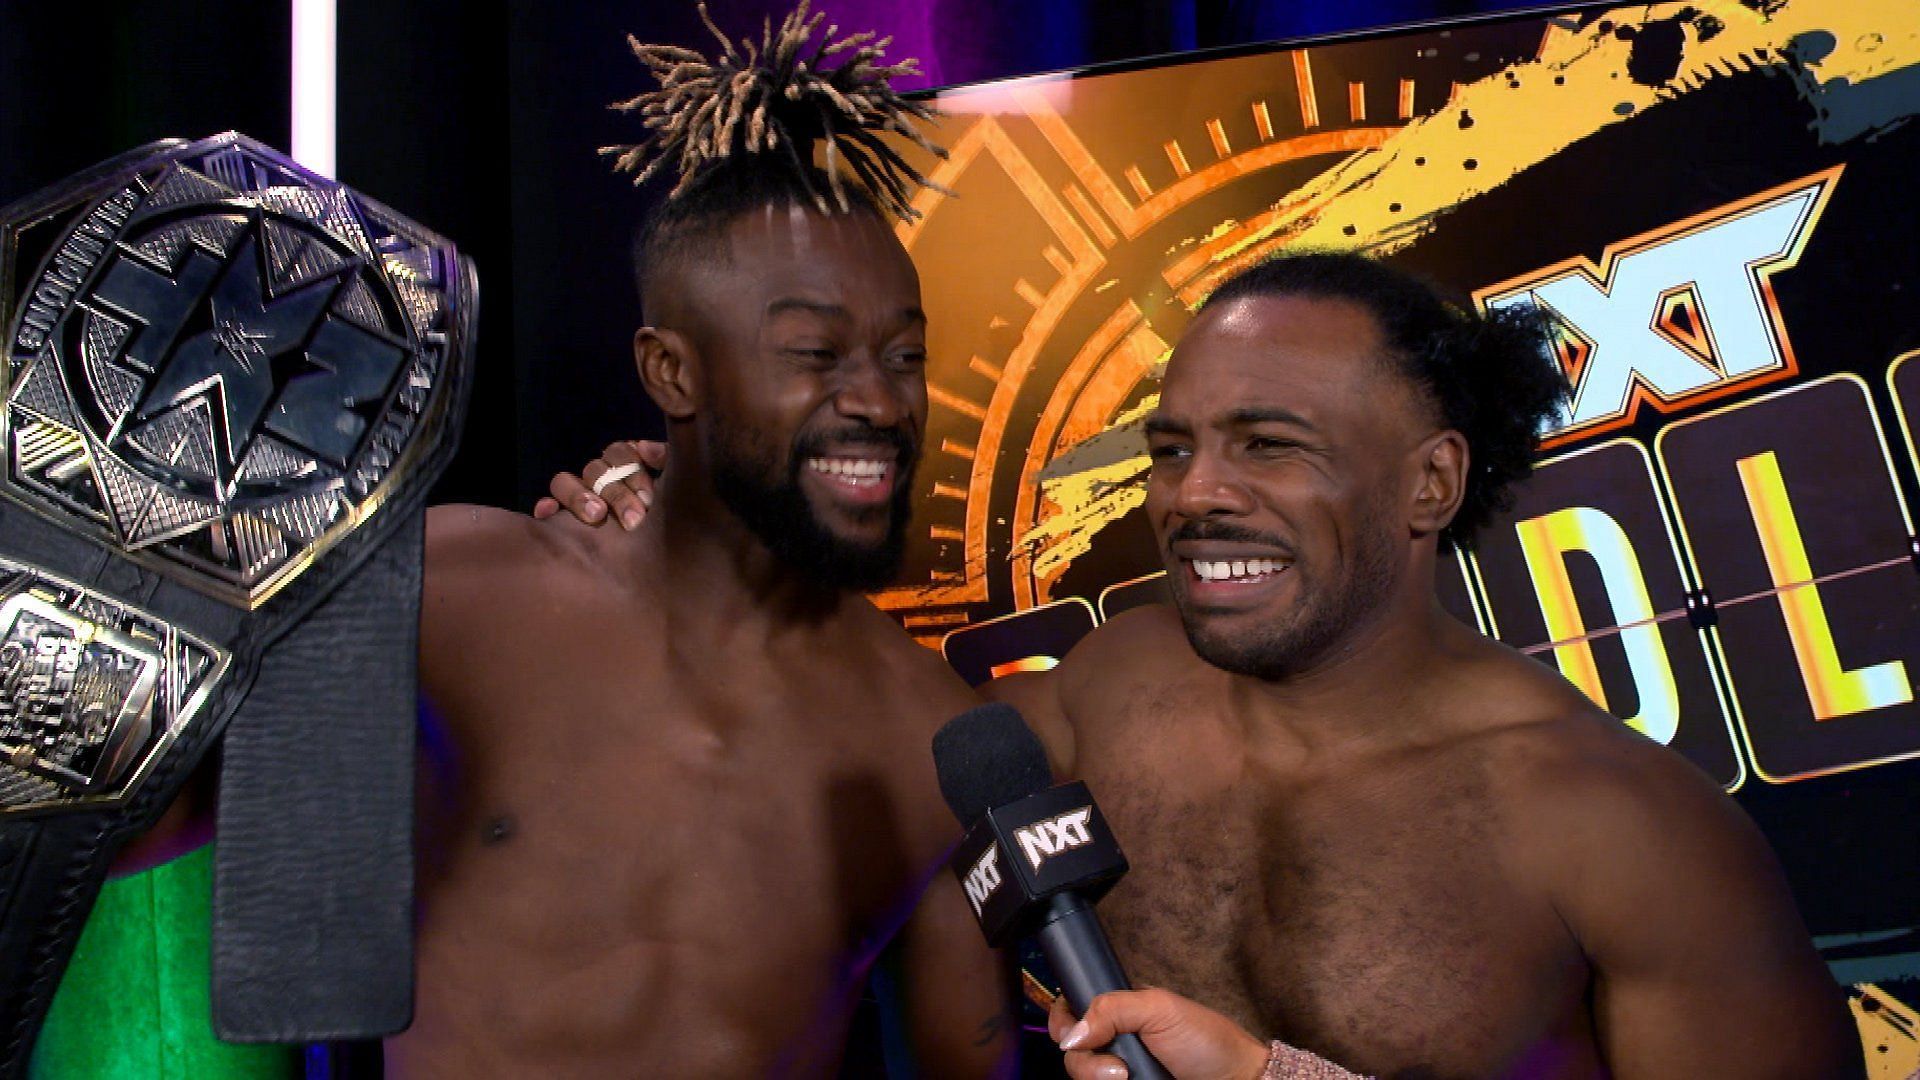 The New Day on NXT